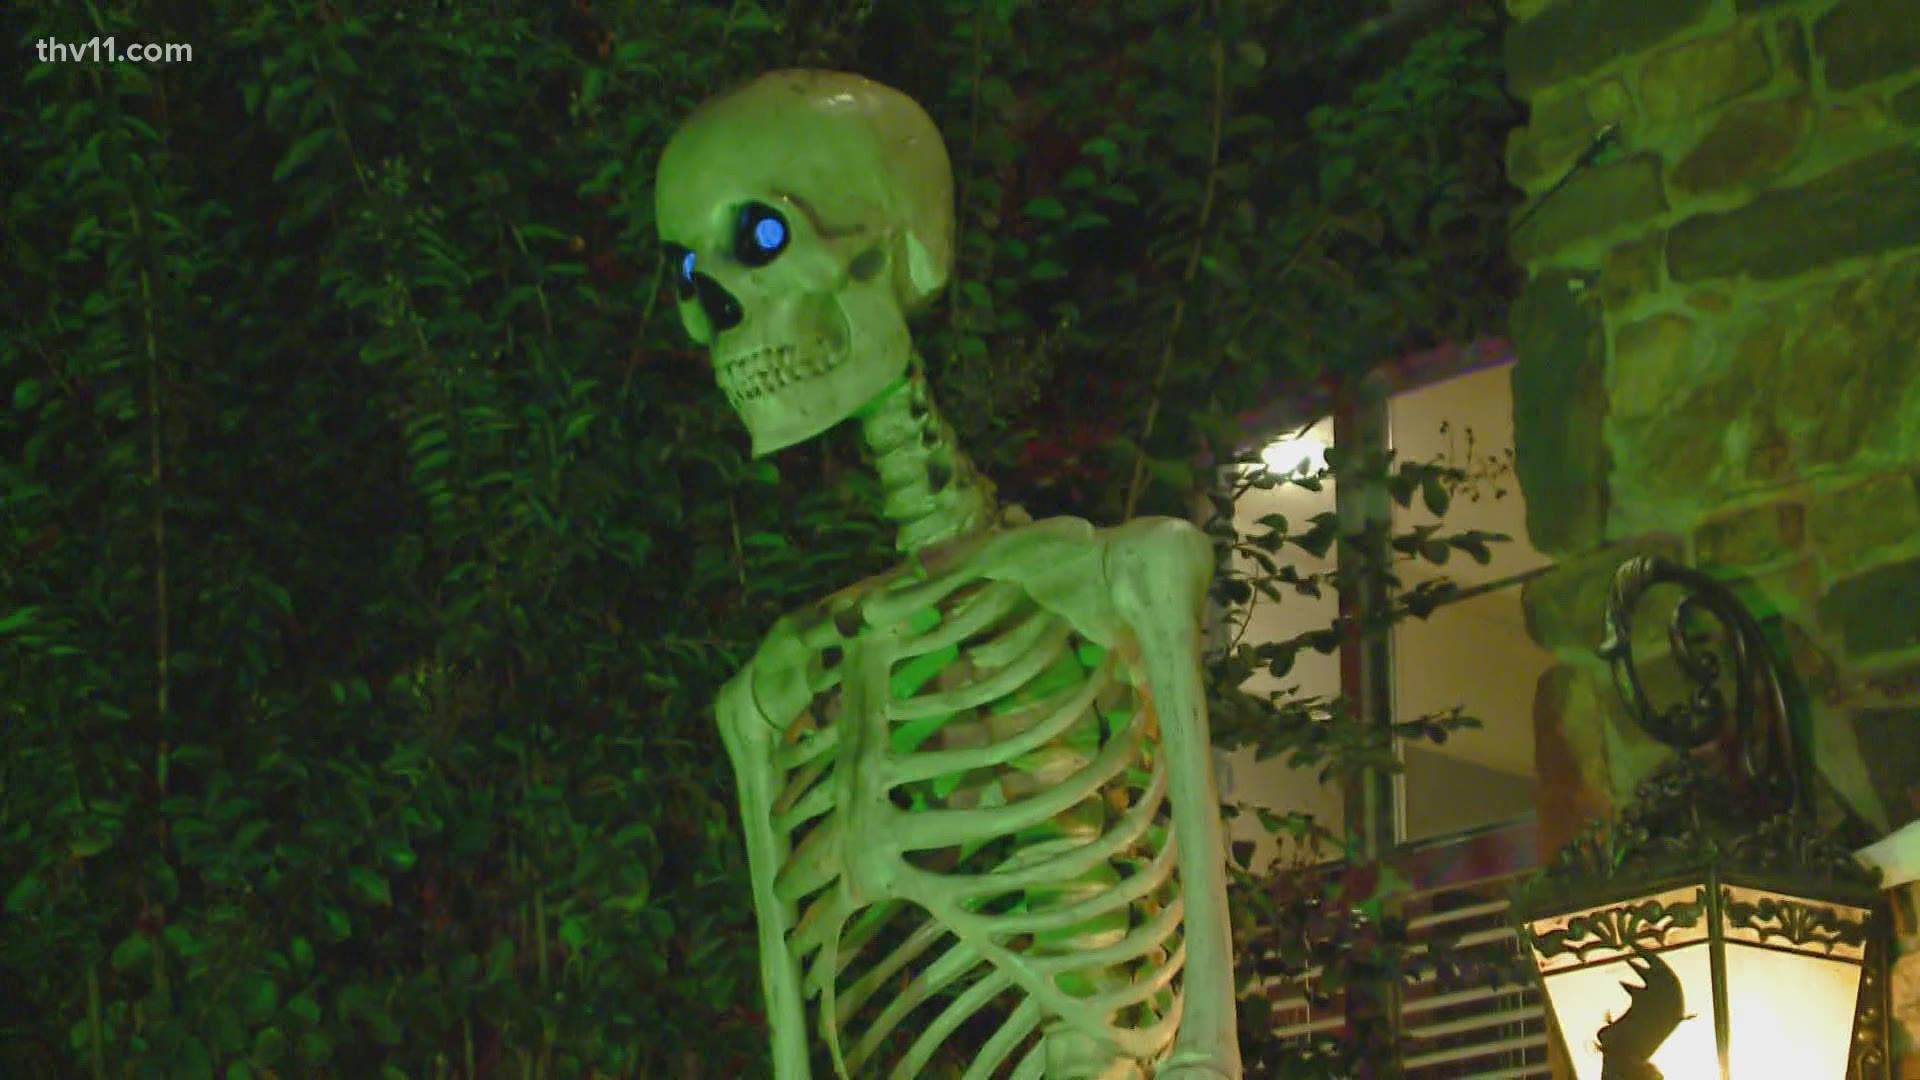 The house even has the must-have Halloween decoration: 12-foot-tall skeletons on each side of the doorway.